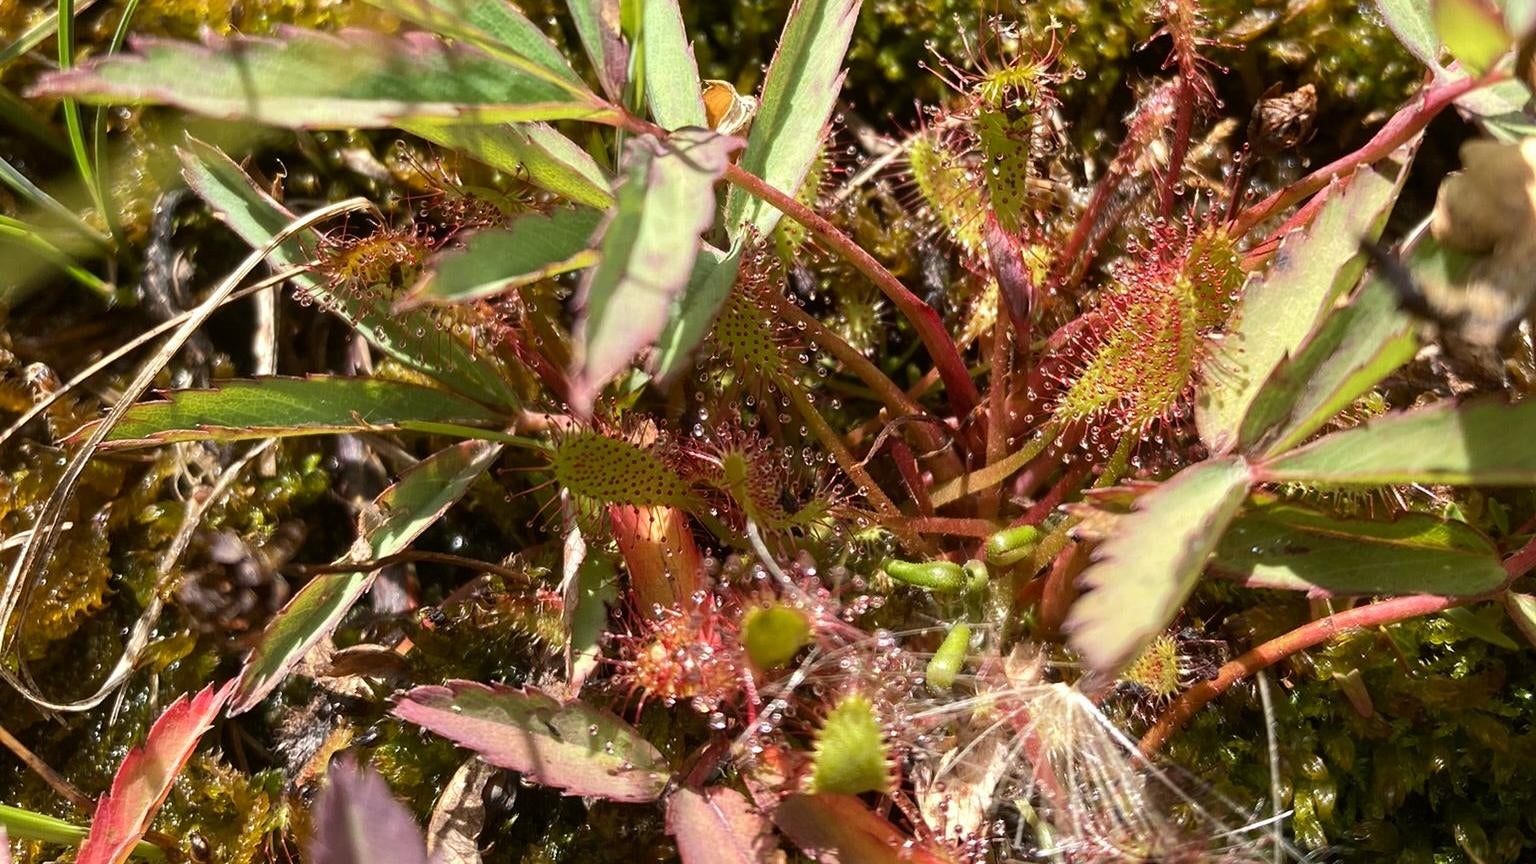 Sundews catch their prey with the help of a viscous, mucous-like substance. The sundew goo is so sticky that researchers have sought to use and mimic the glue in applications like wound dressings and tissue engineering. (Photo: Lauren Leffer / Gizmodo)